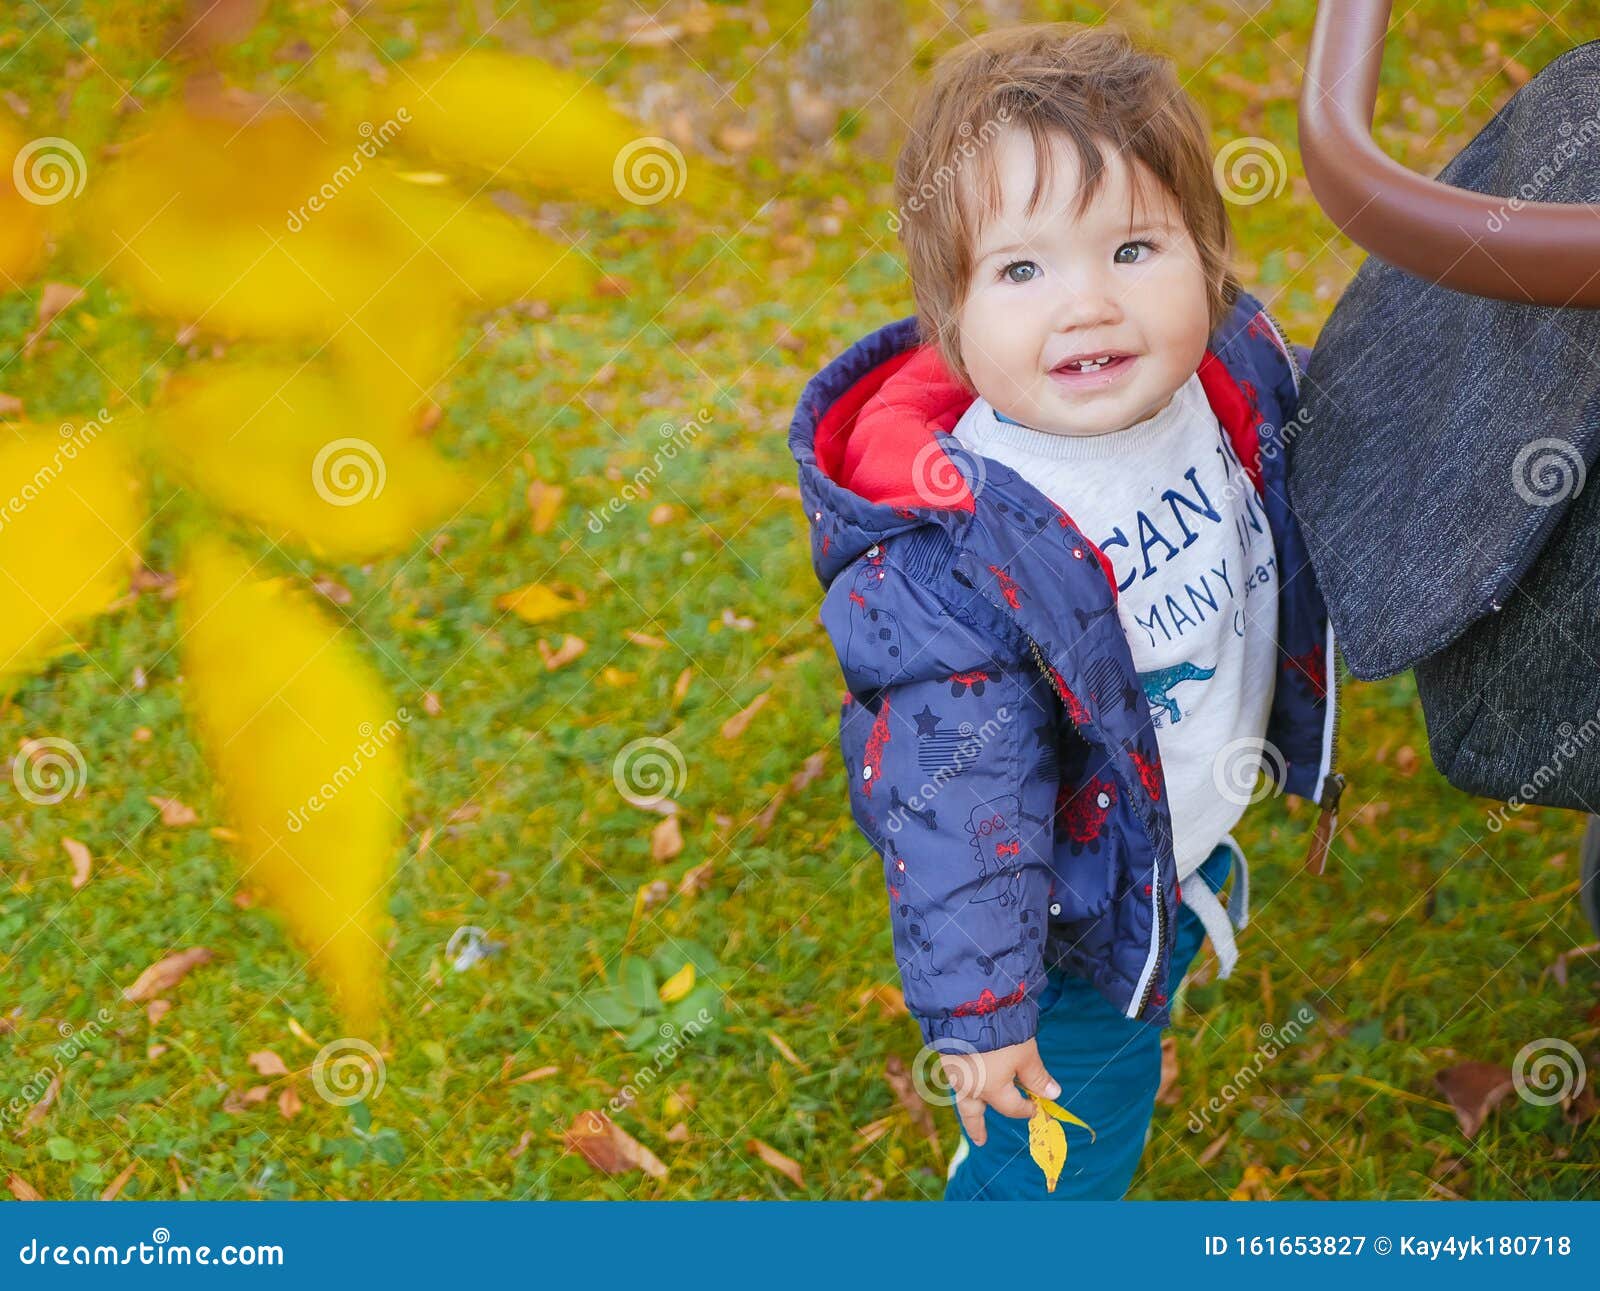 Baby and Yellow Leaf. Lovely Baby with Yellow Leaf Outdoors Stock Image ...